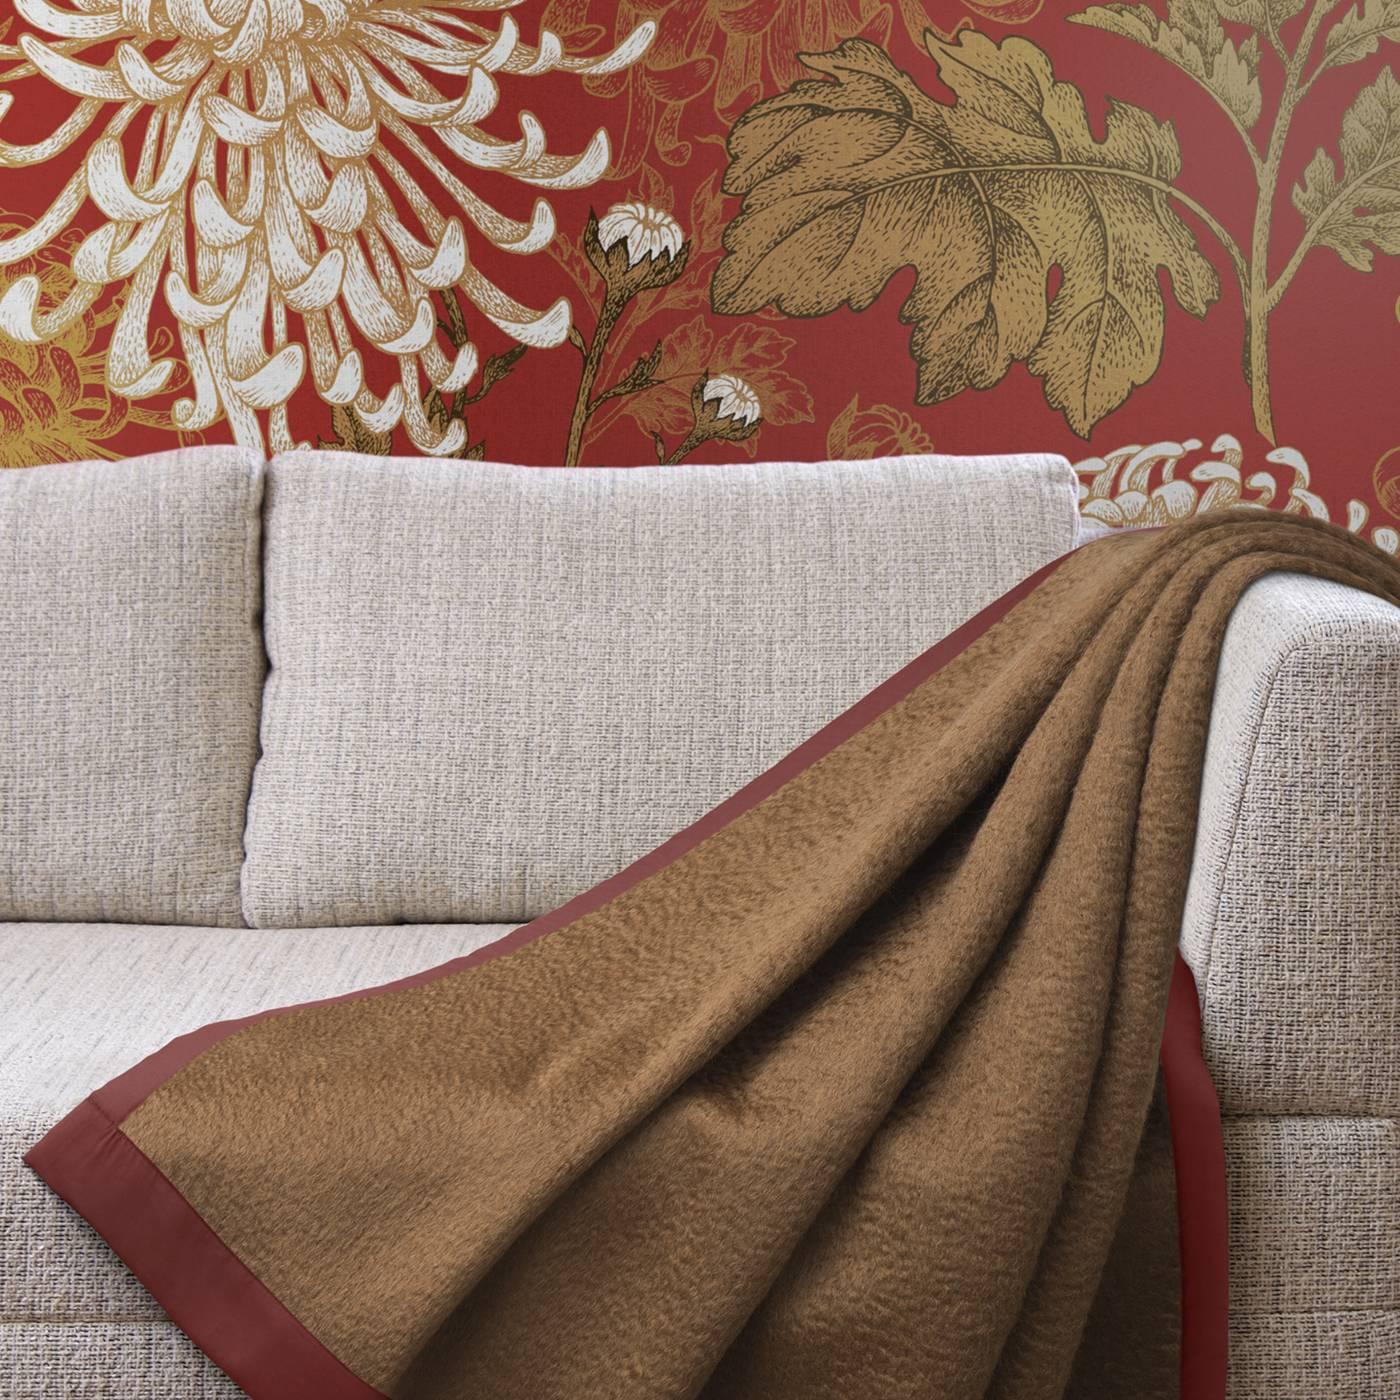 Luxuriously soft, this blanket blends the warmth of 10% virgin wool with the softness of 80% mohair, framed by a contrasting silk border for a richly-tailored finish. This generously sized blanket features an elegant brown and red color combination